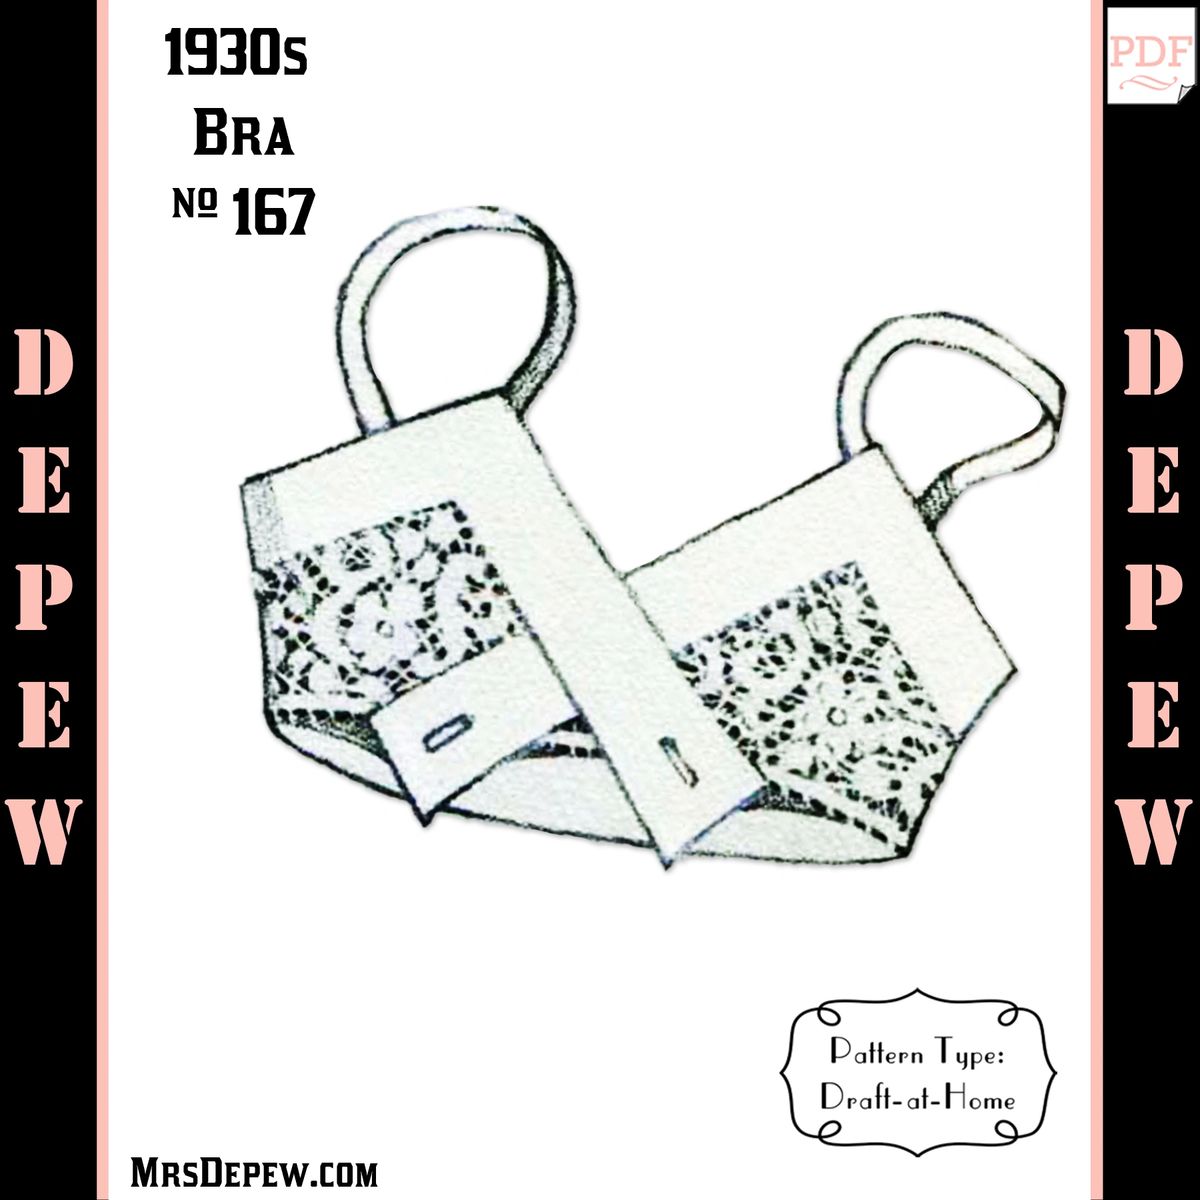 D-A-H Vintage Sewing Pattern 1930s French Bra With Lace Inset in Any Size -  PLUS Size Included -167